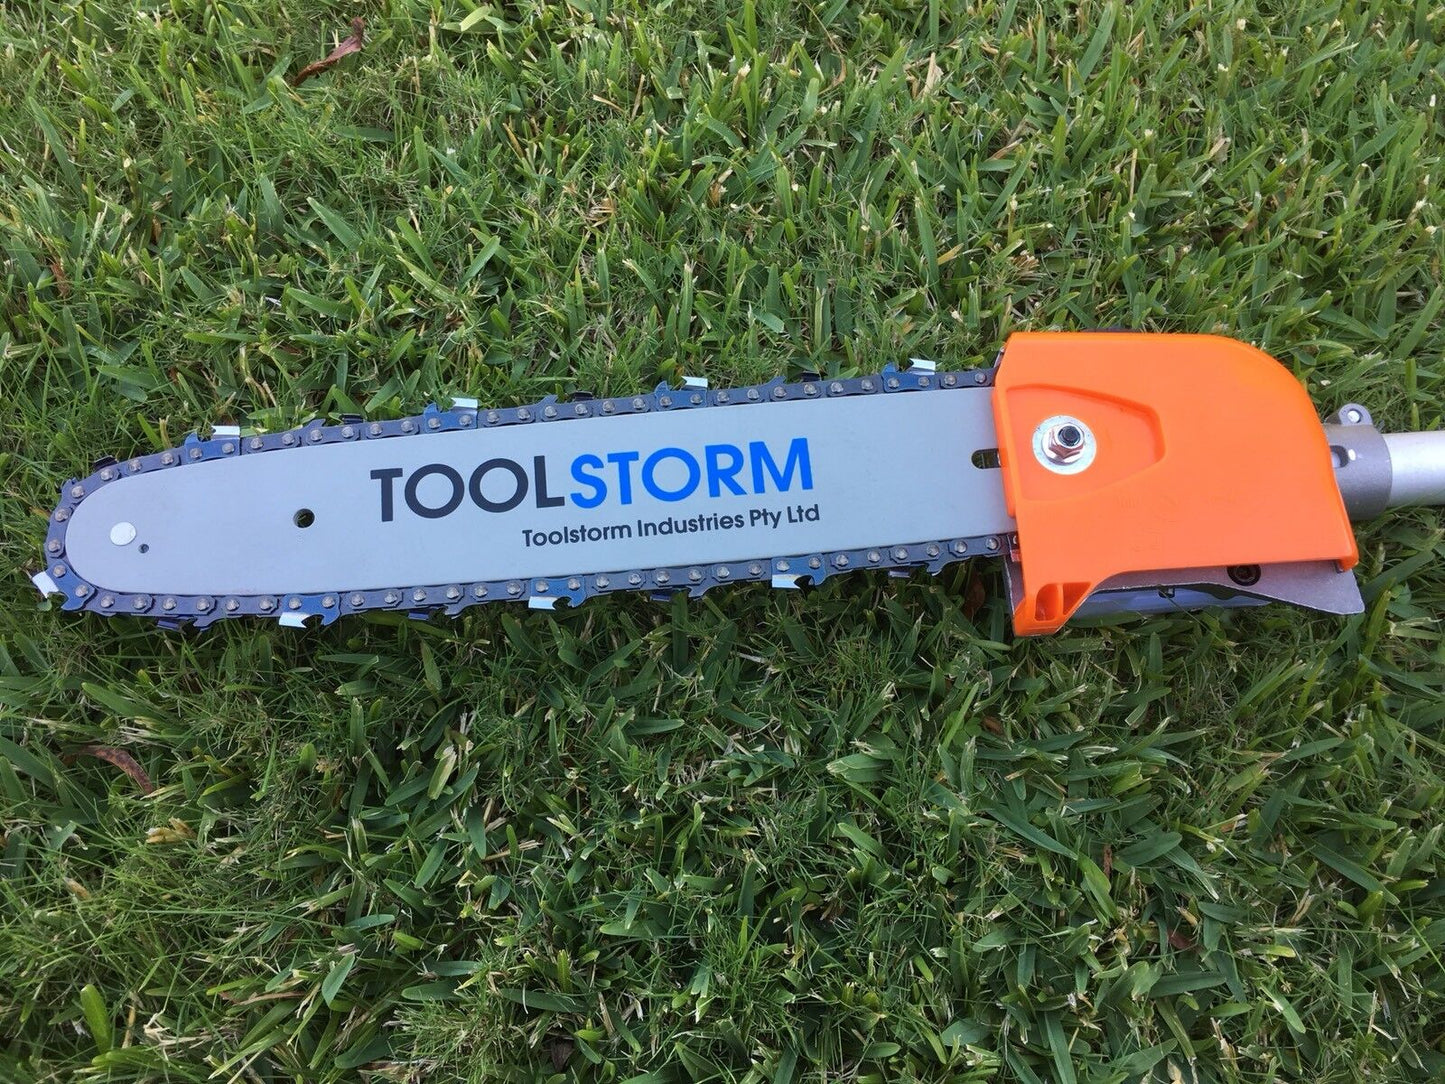 Pole saw/Chainsaw Attachment For TOOLSTORM 4-STROKE Multi-tools Brush cutter